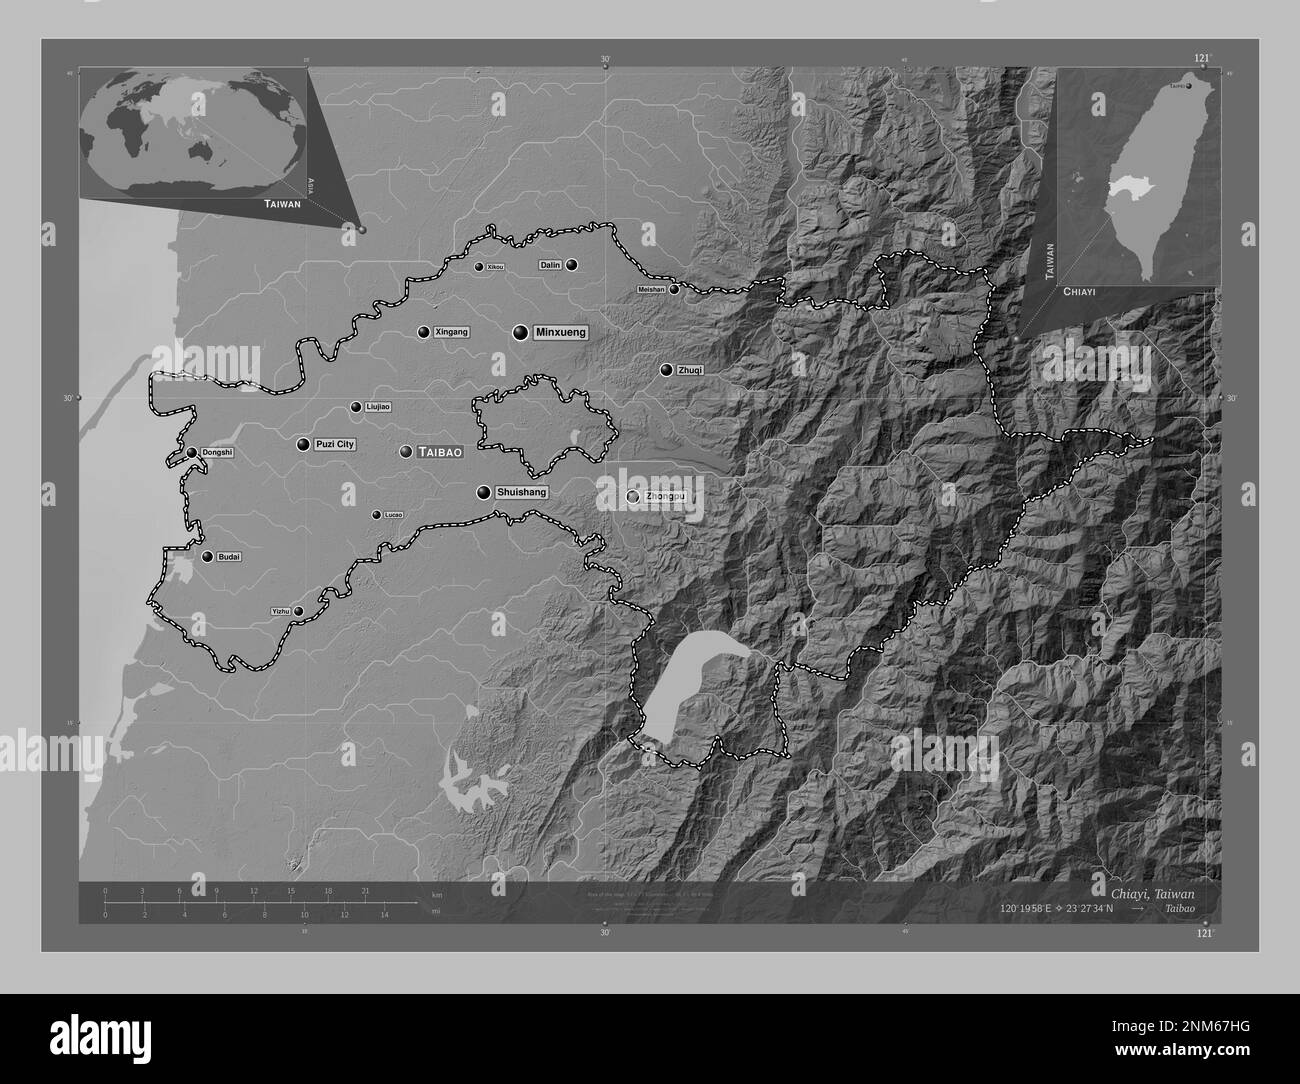 Chiayi, county of Taiwan. Grayscale elevation map with lakes and rivers. Locations and names of major cities of the region. Corner auxiliary location Stock Photo